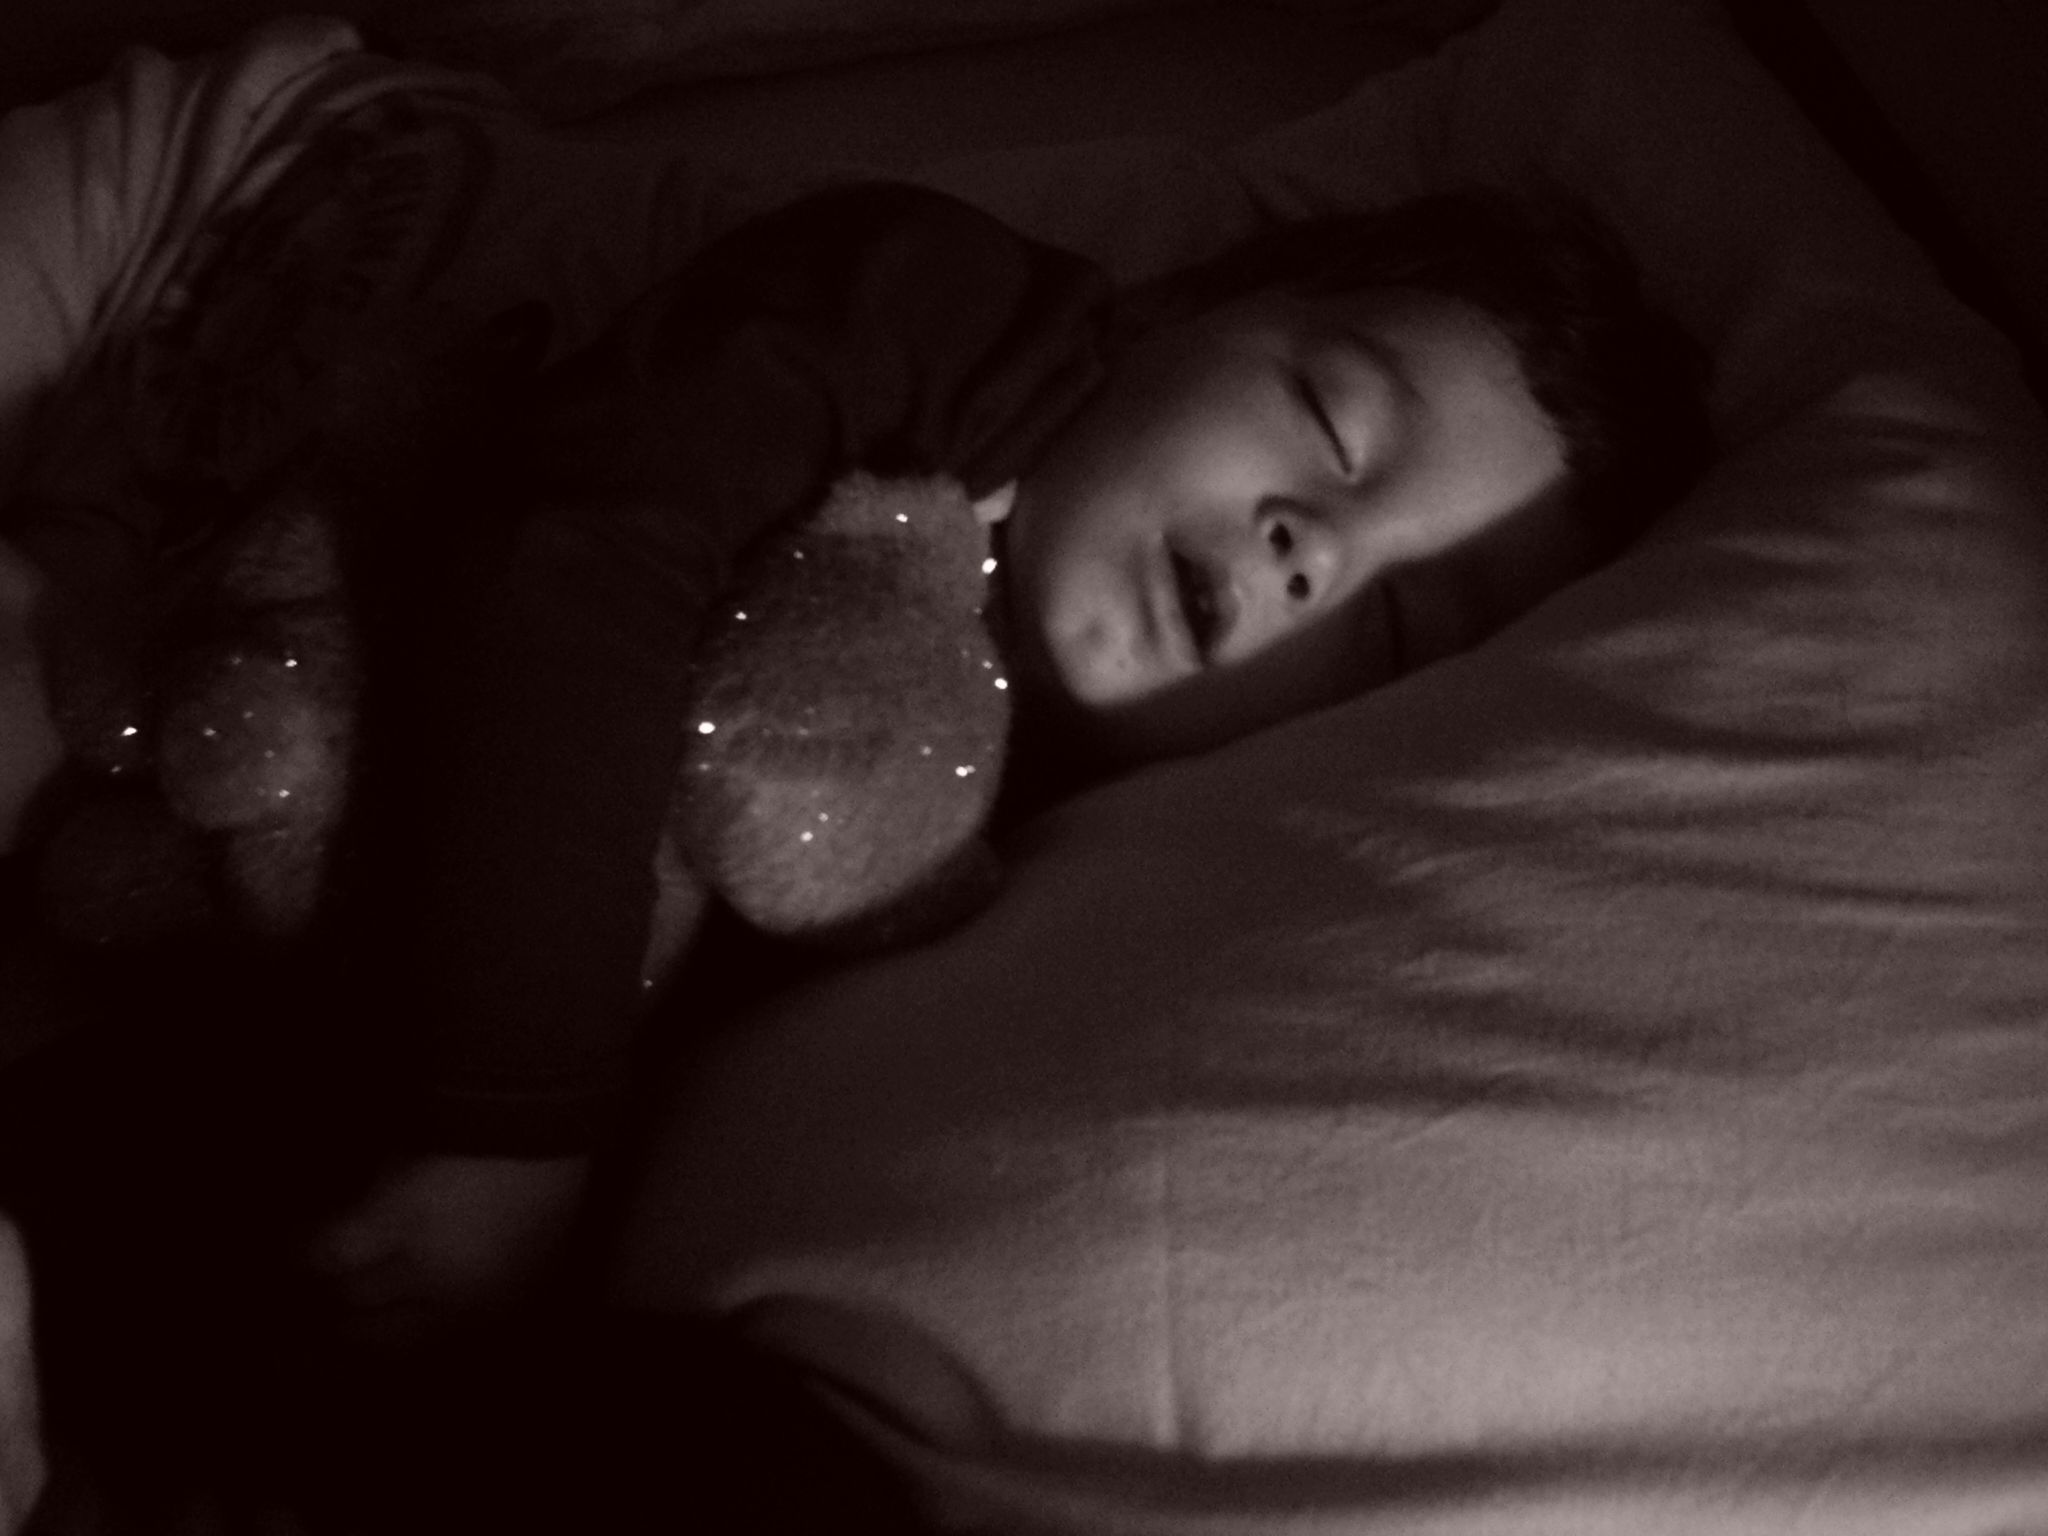 a young child is sleeping with her stuffed bear